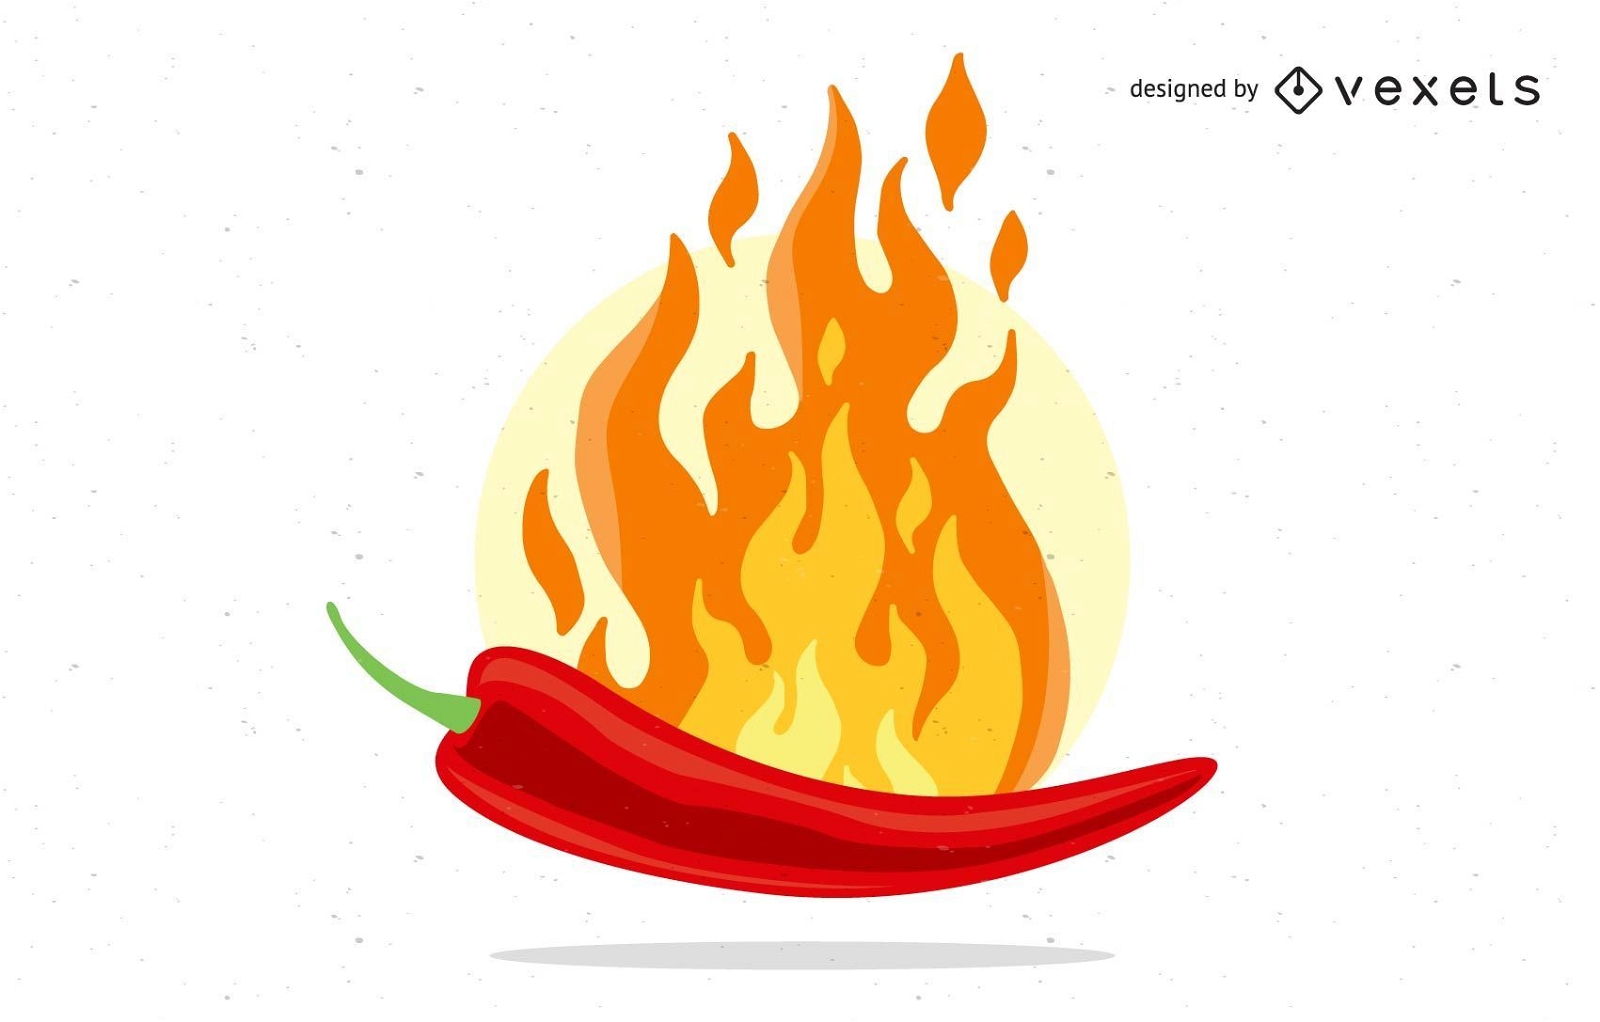 Flaming red chili pepper illustration